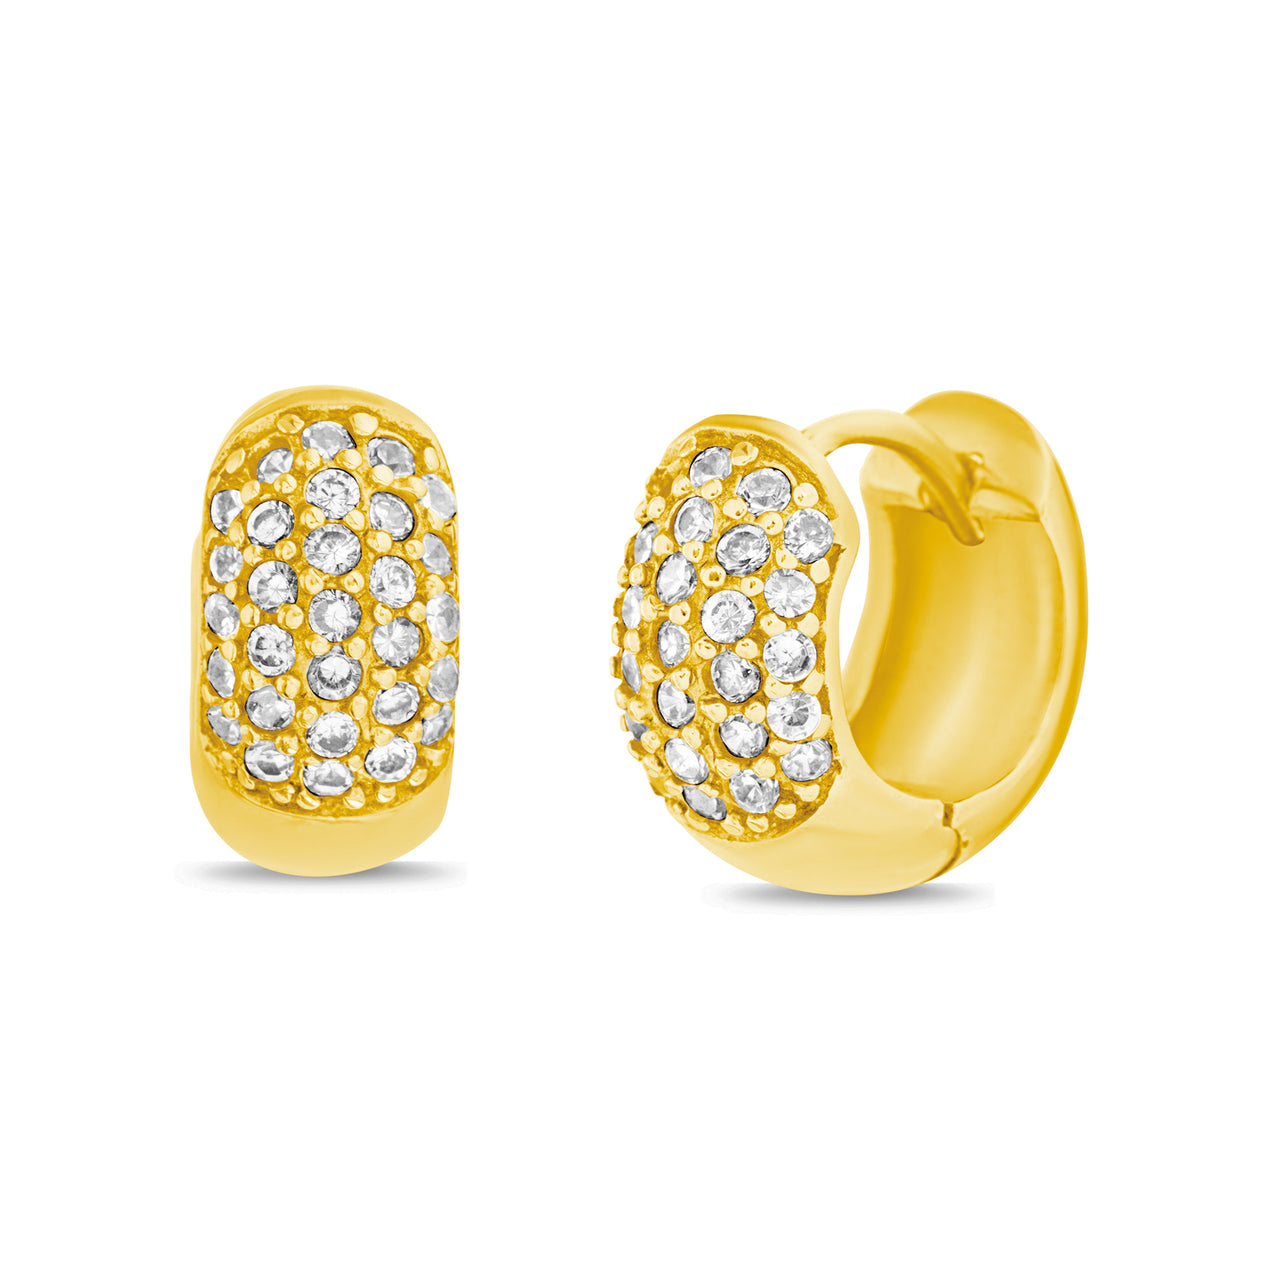 Lesa Michele Cubic Zirconia Round Huggie Earrings in Yellow Gold or Rhodium Plated Sterling Silver